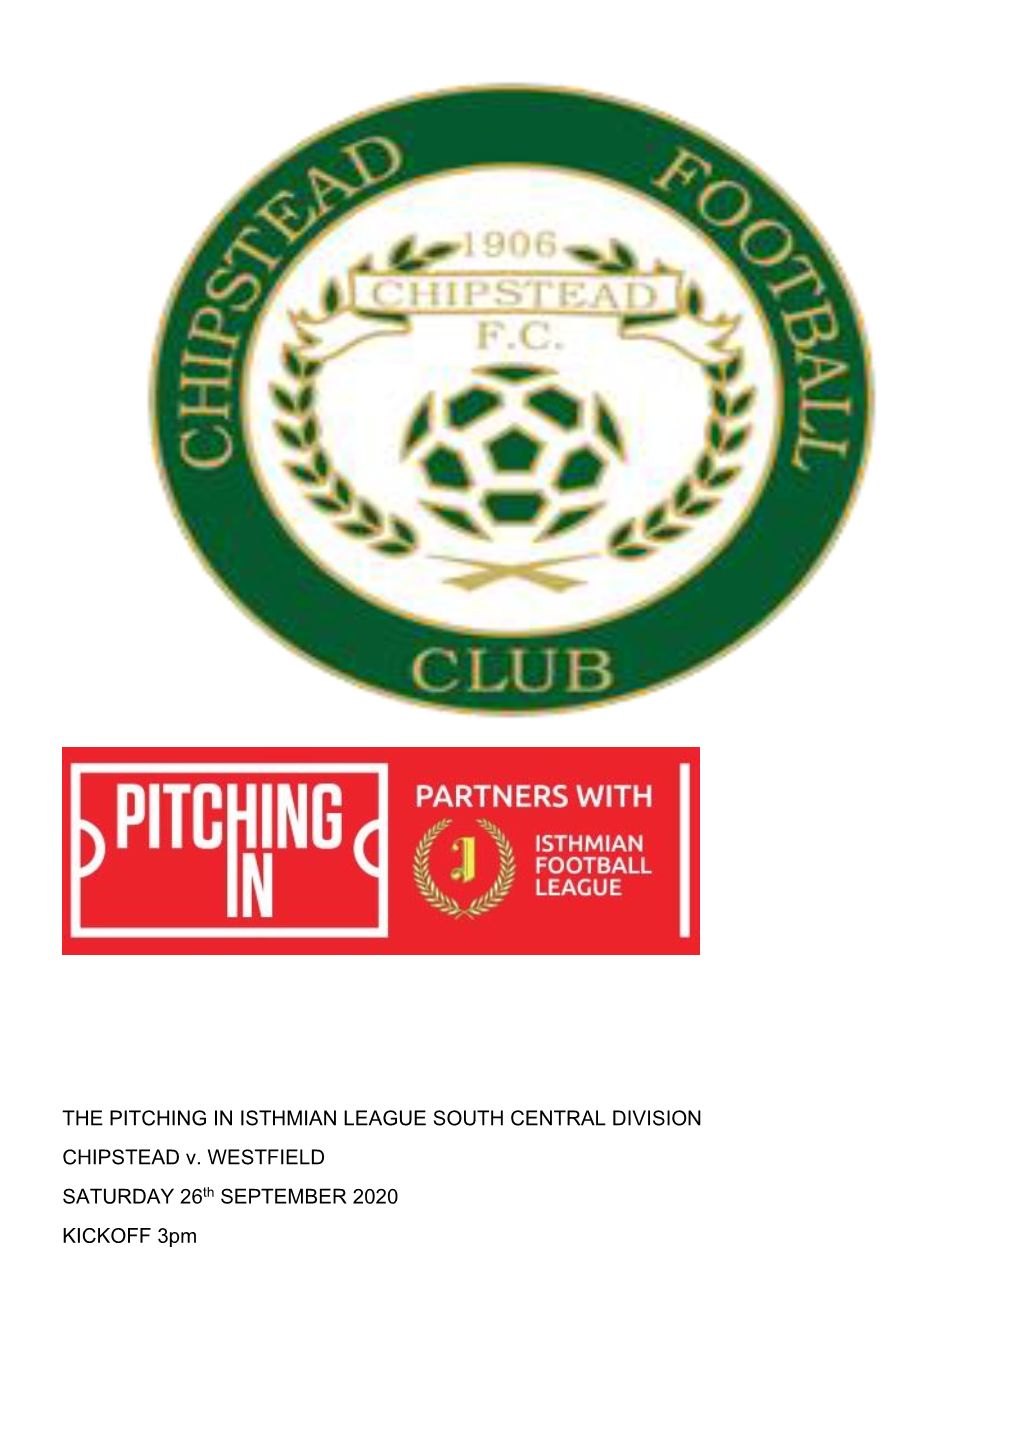 THE PITCHING in ISTHMIAN LEAGUE SOUTH CENTRAL DIVISION CHIPSTEAD V. WESTFIELD SATURDAY 26Th SEPTEMBER 2020 KICKOFF 3Pm